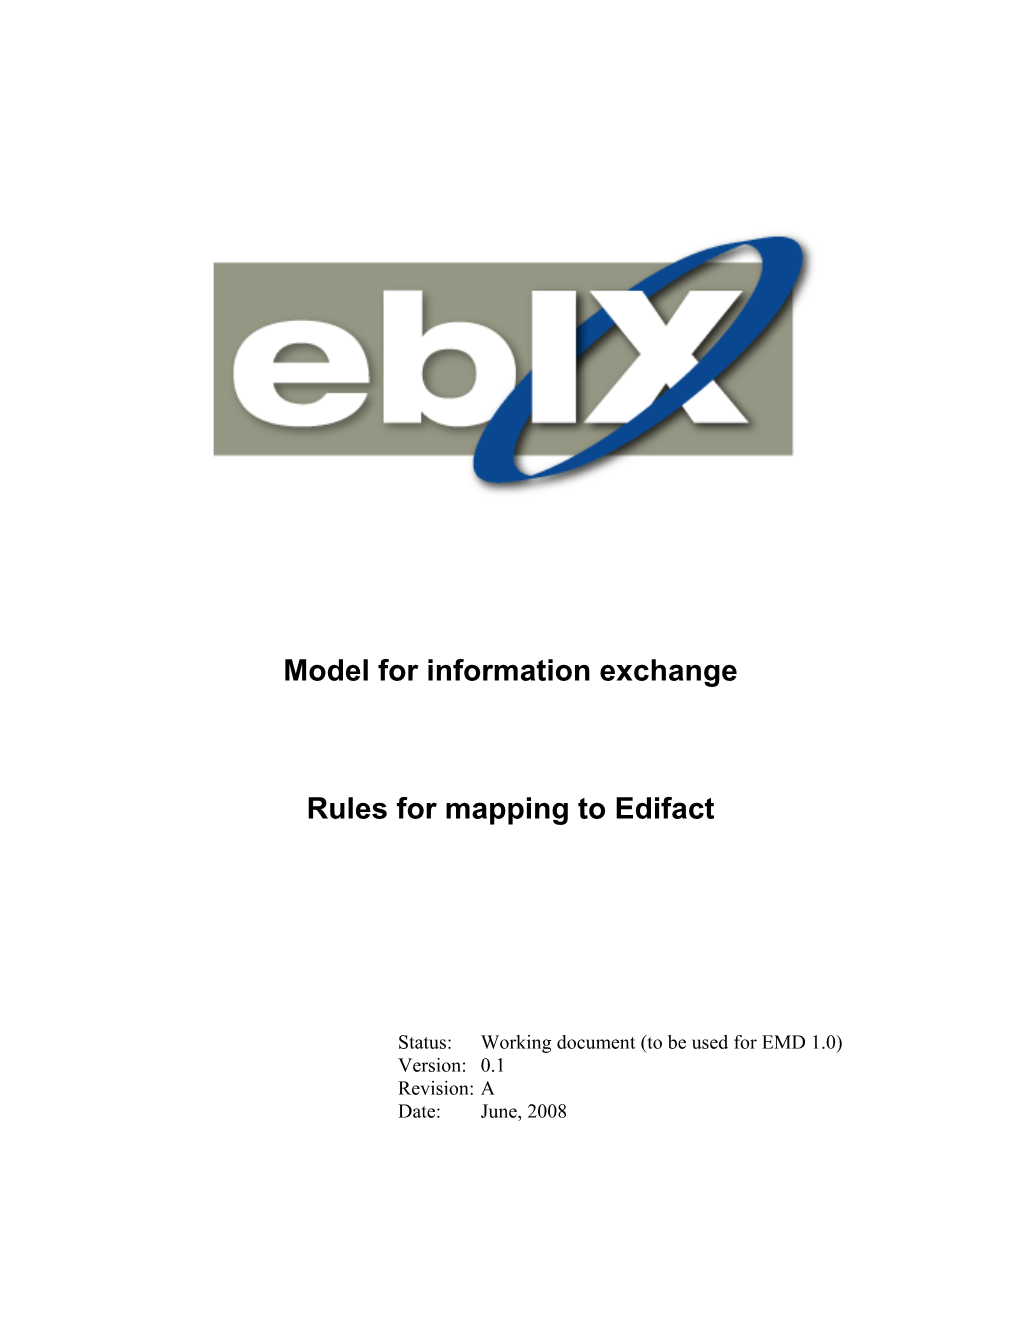 Ebix Rules for Mapping to Edifact 0.1.A